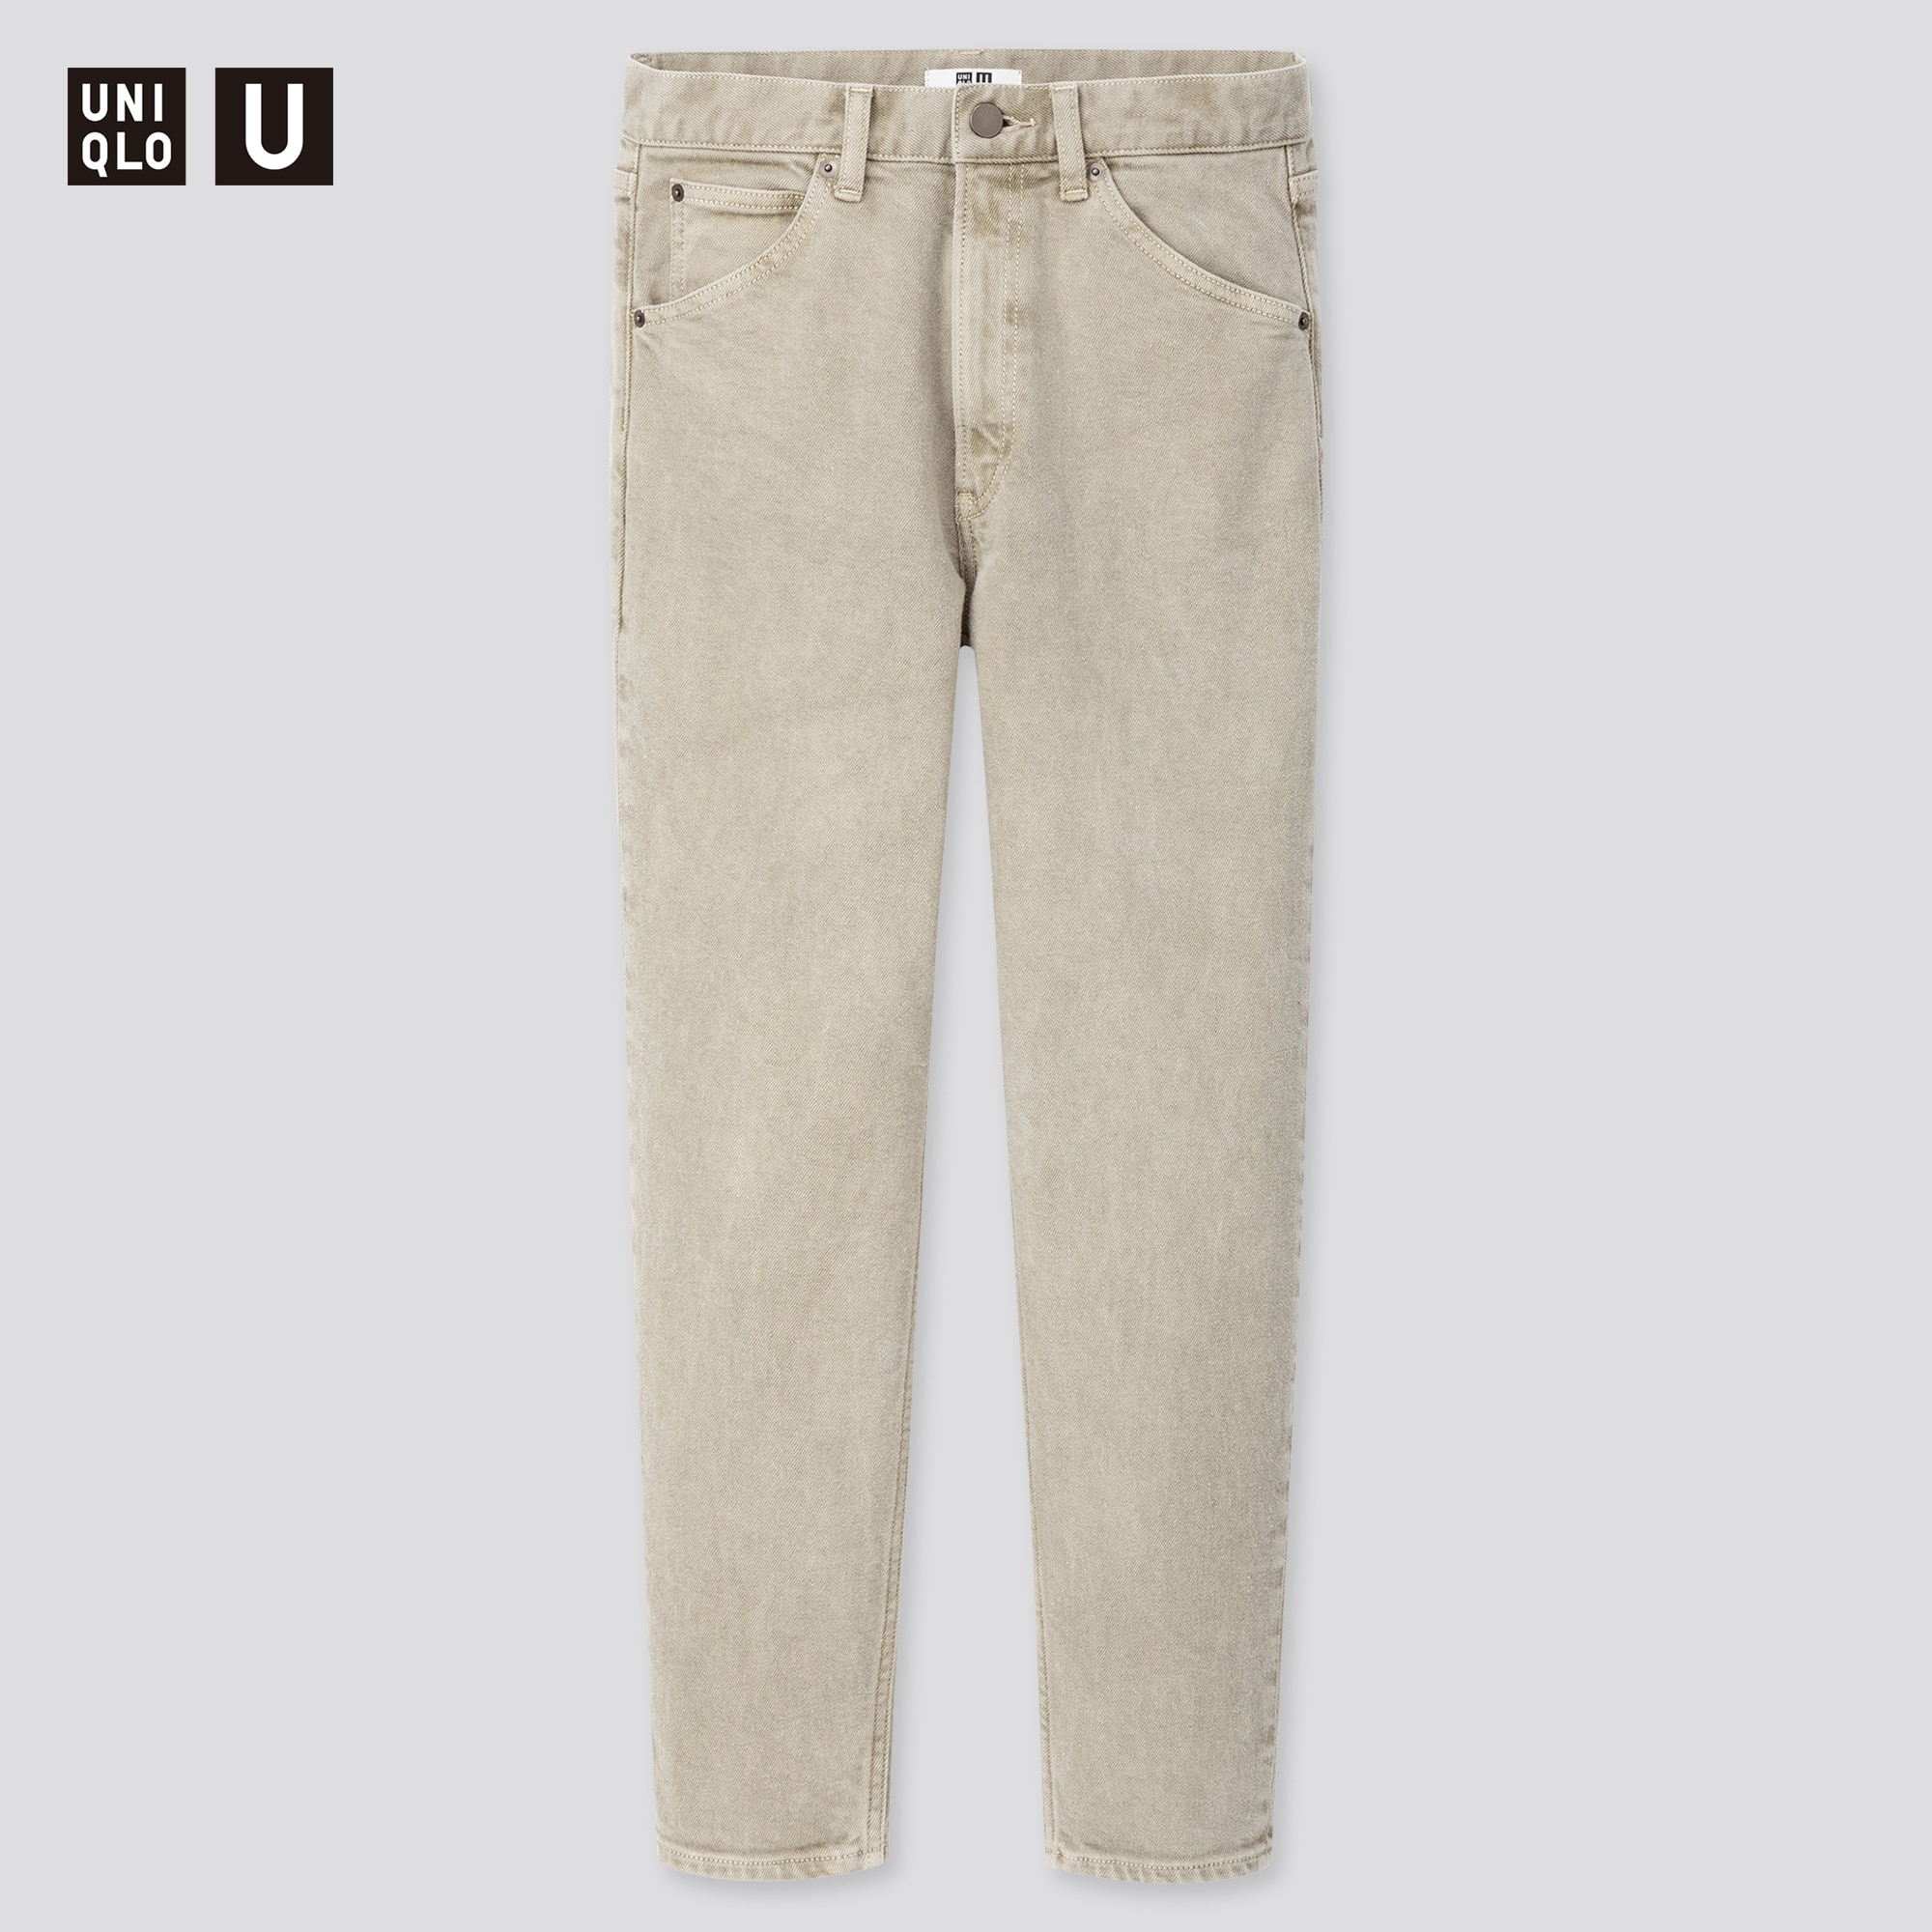 WOMEN UNIQLO U SLIM FIT TAPERED ANKLE LENGTH JEANS